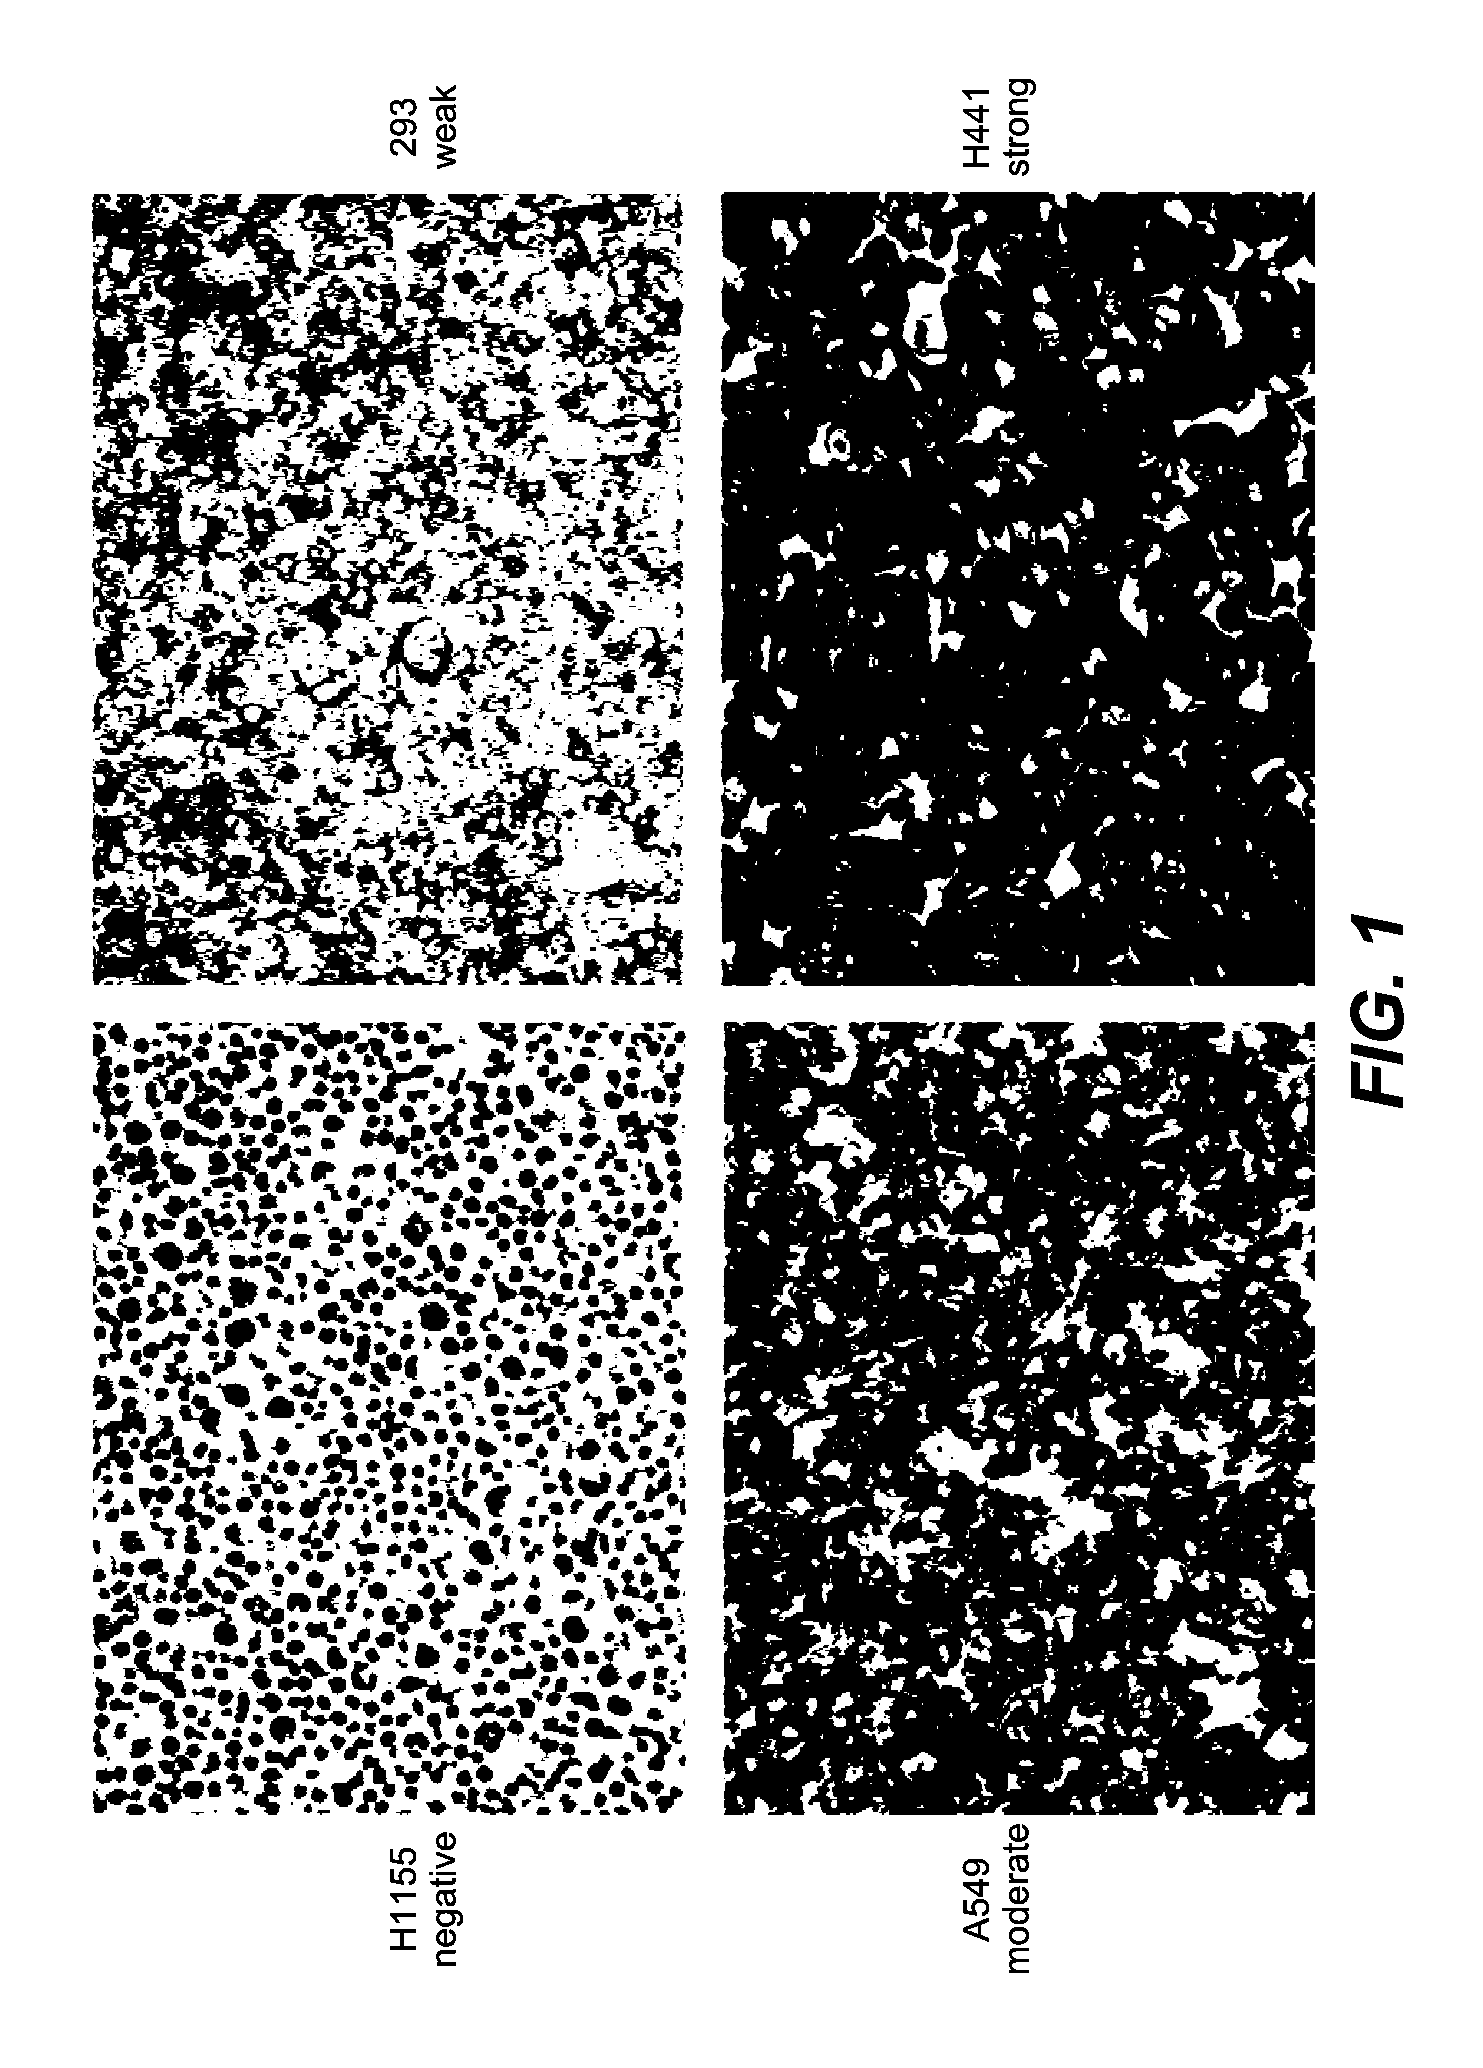 Biomarkers and methods of treatment